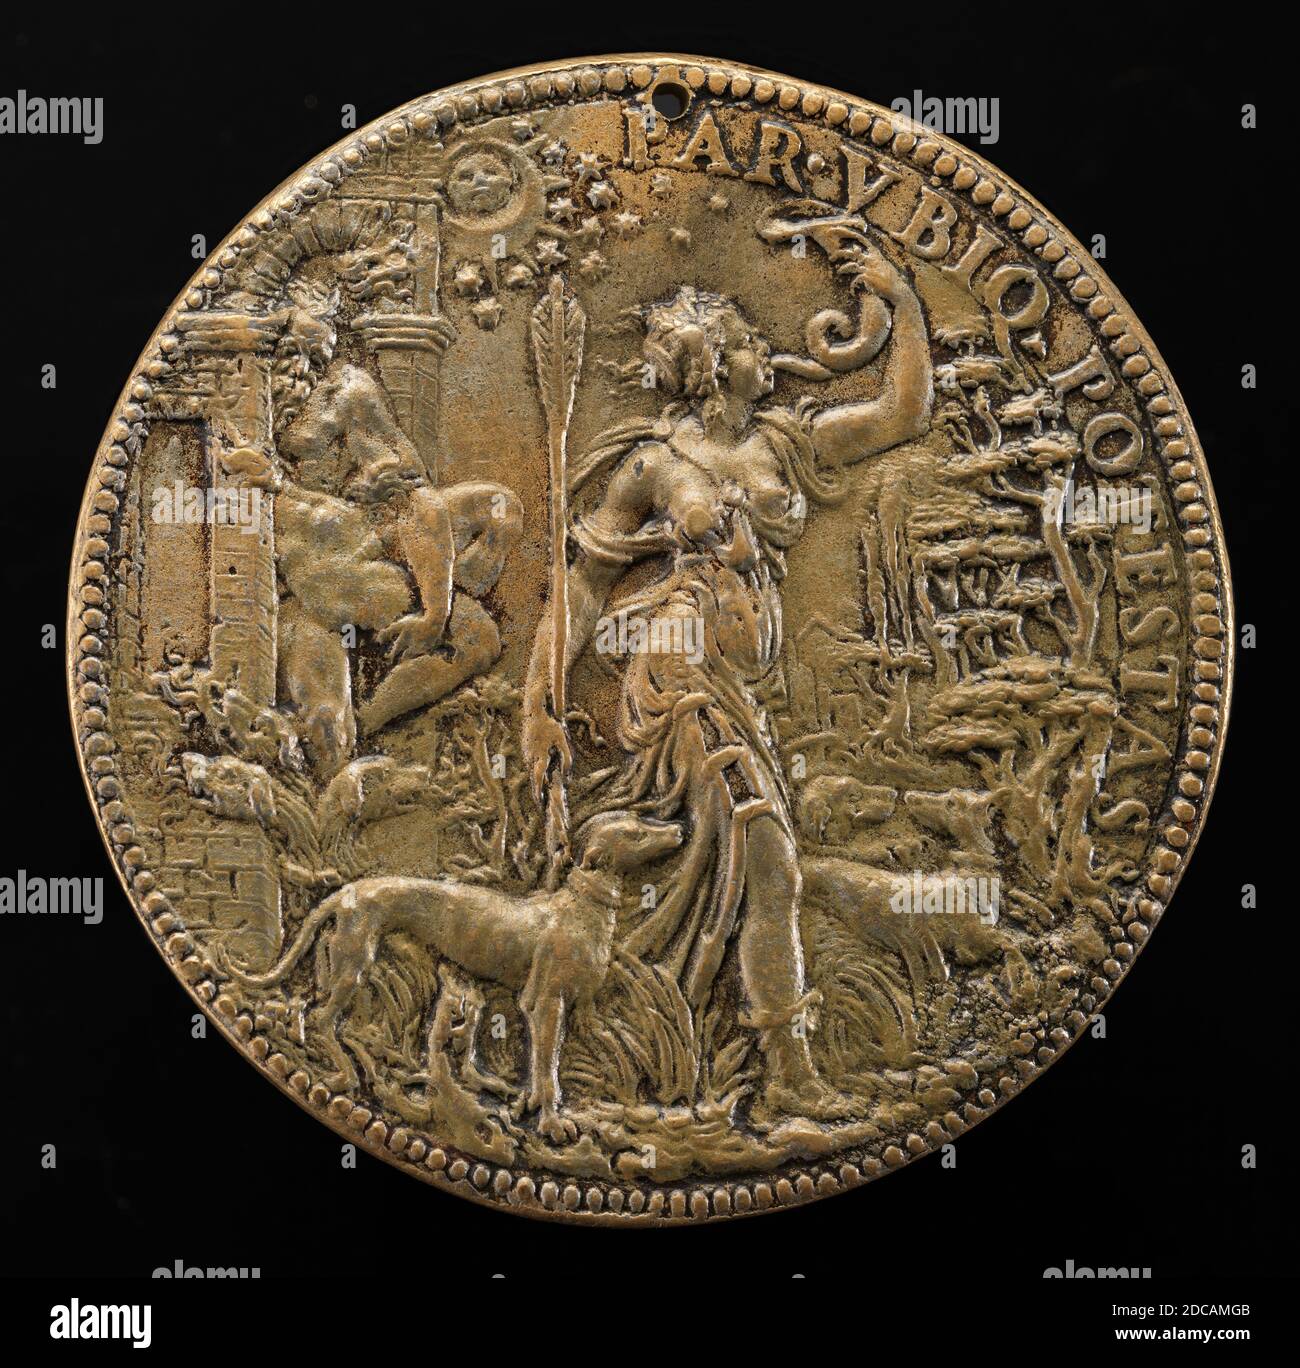 Leone Leoni, (artist), Milanese, c. 1509 - 1590, Ippolita as Diana with Hunting Dogs in a Landscape; behind her Pluto and Cerberus, 1551, bronze, overall (diameter): 6.8 cm (2 11/16 in.), gross weight: 95.47 gr (0.21 lb.), axis: 12:00 Stock Photo